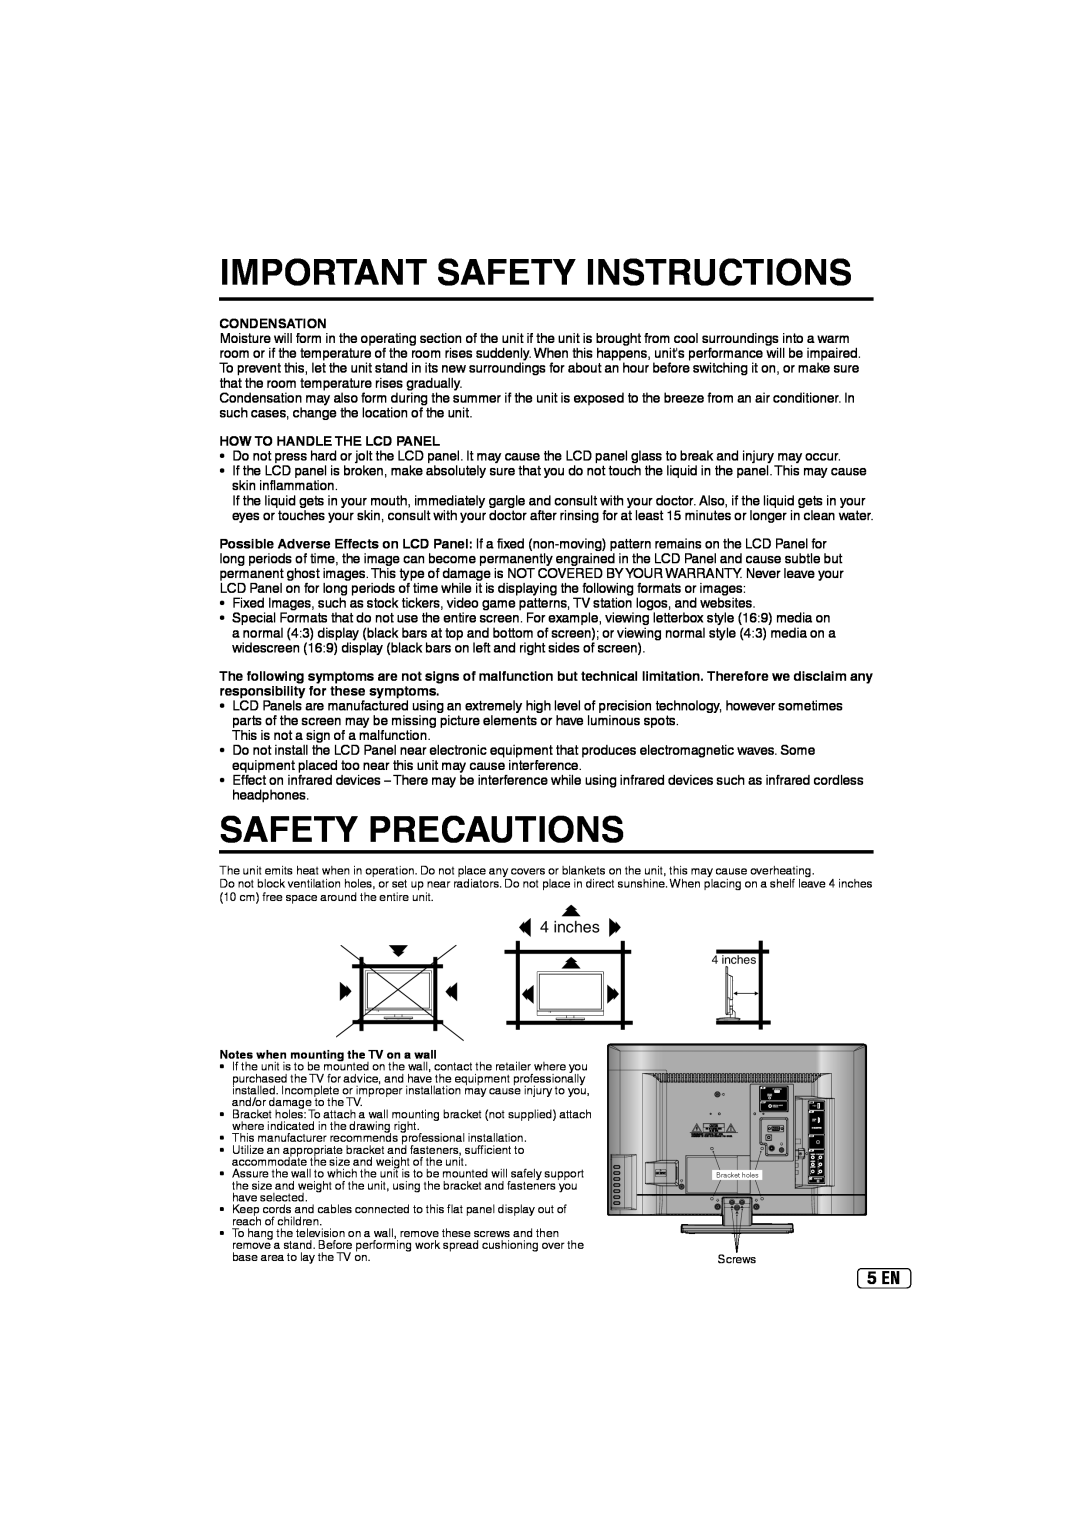 Sansui SLED2237 Safety Precautions, 5 EN, inches, Important Safety Instructions, Condensation, How To Handle The Lcd Panel 